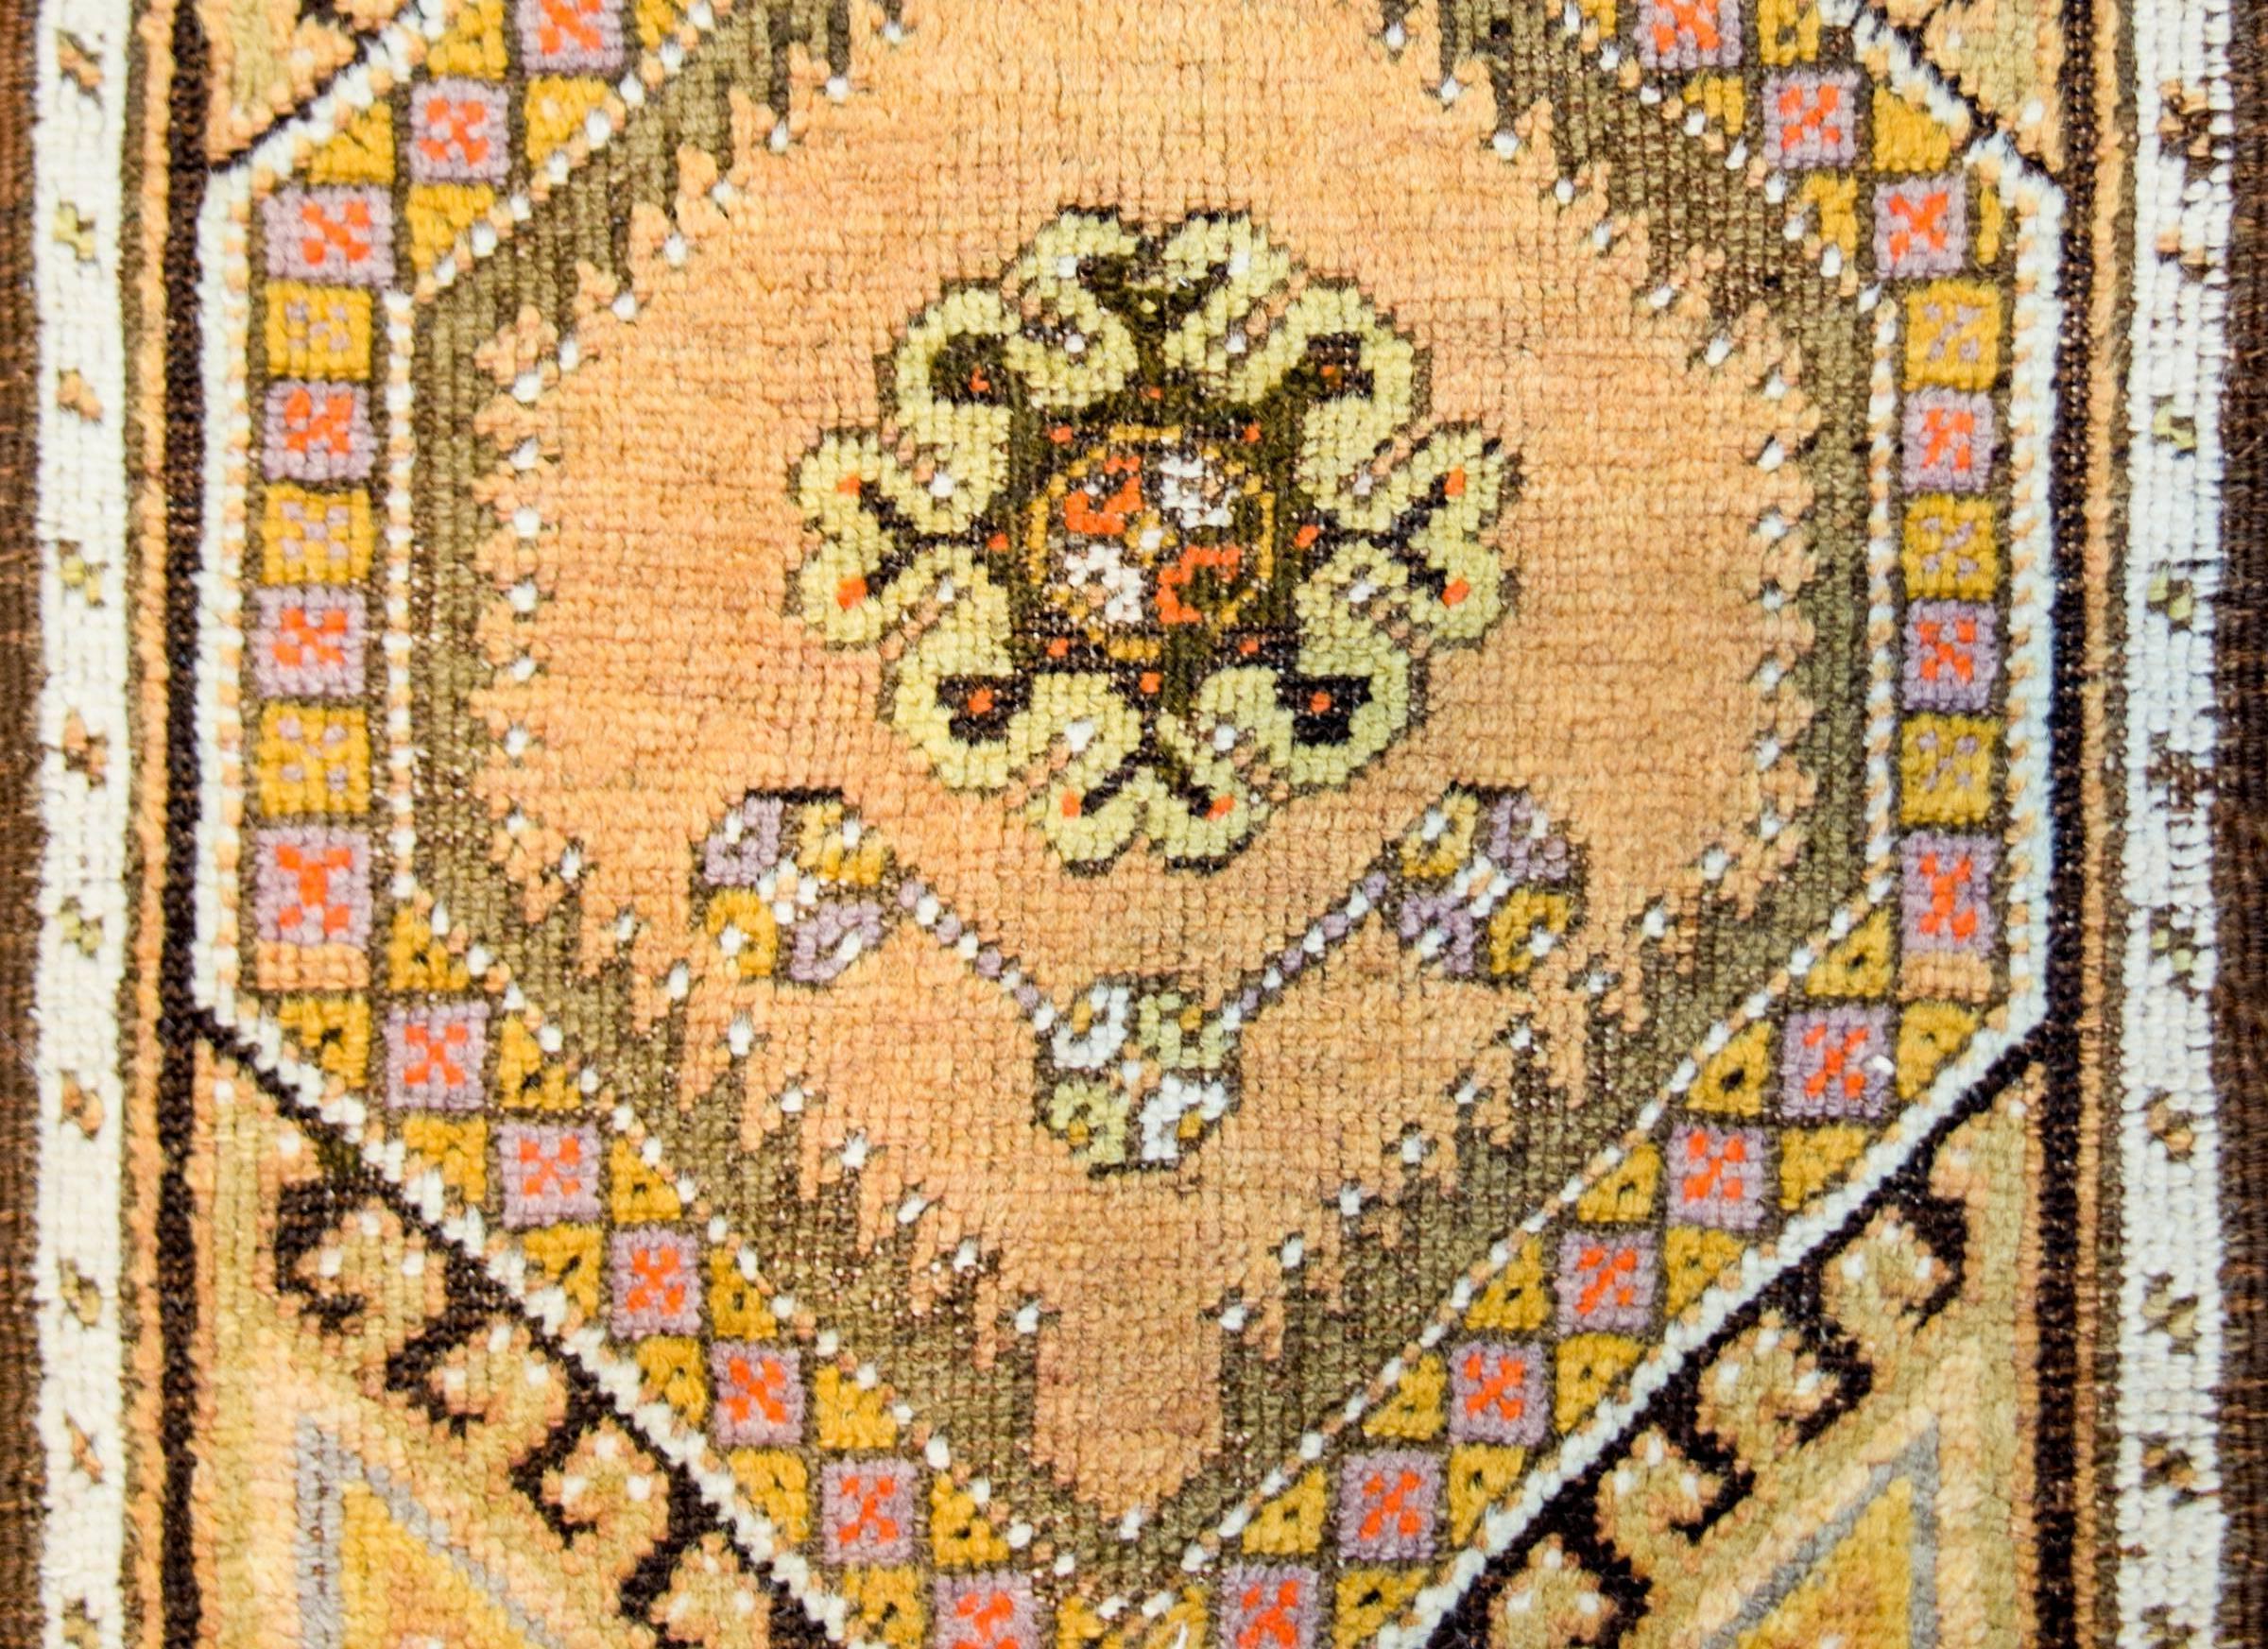 A petite early 20th century Turkish Oushak rug with a wonderful pattern woven in pastel orange, gold, brown, and cream colored wool. The border is thin, composed of a thin white stripe and an even thinner orange stripe.